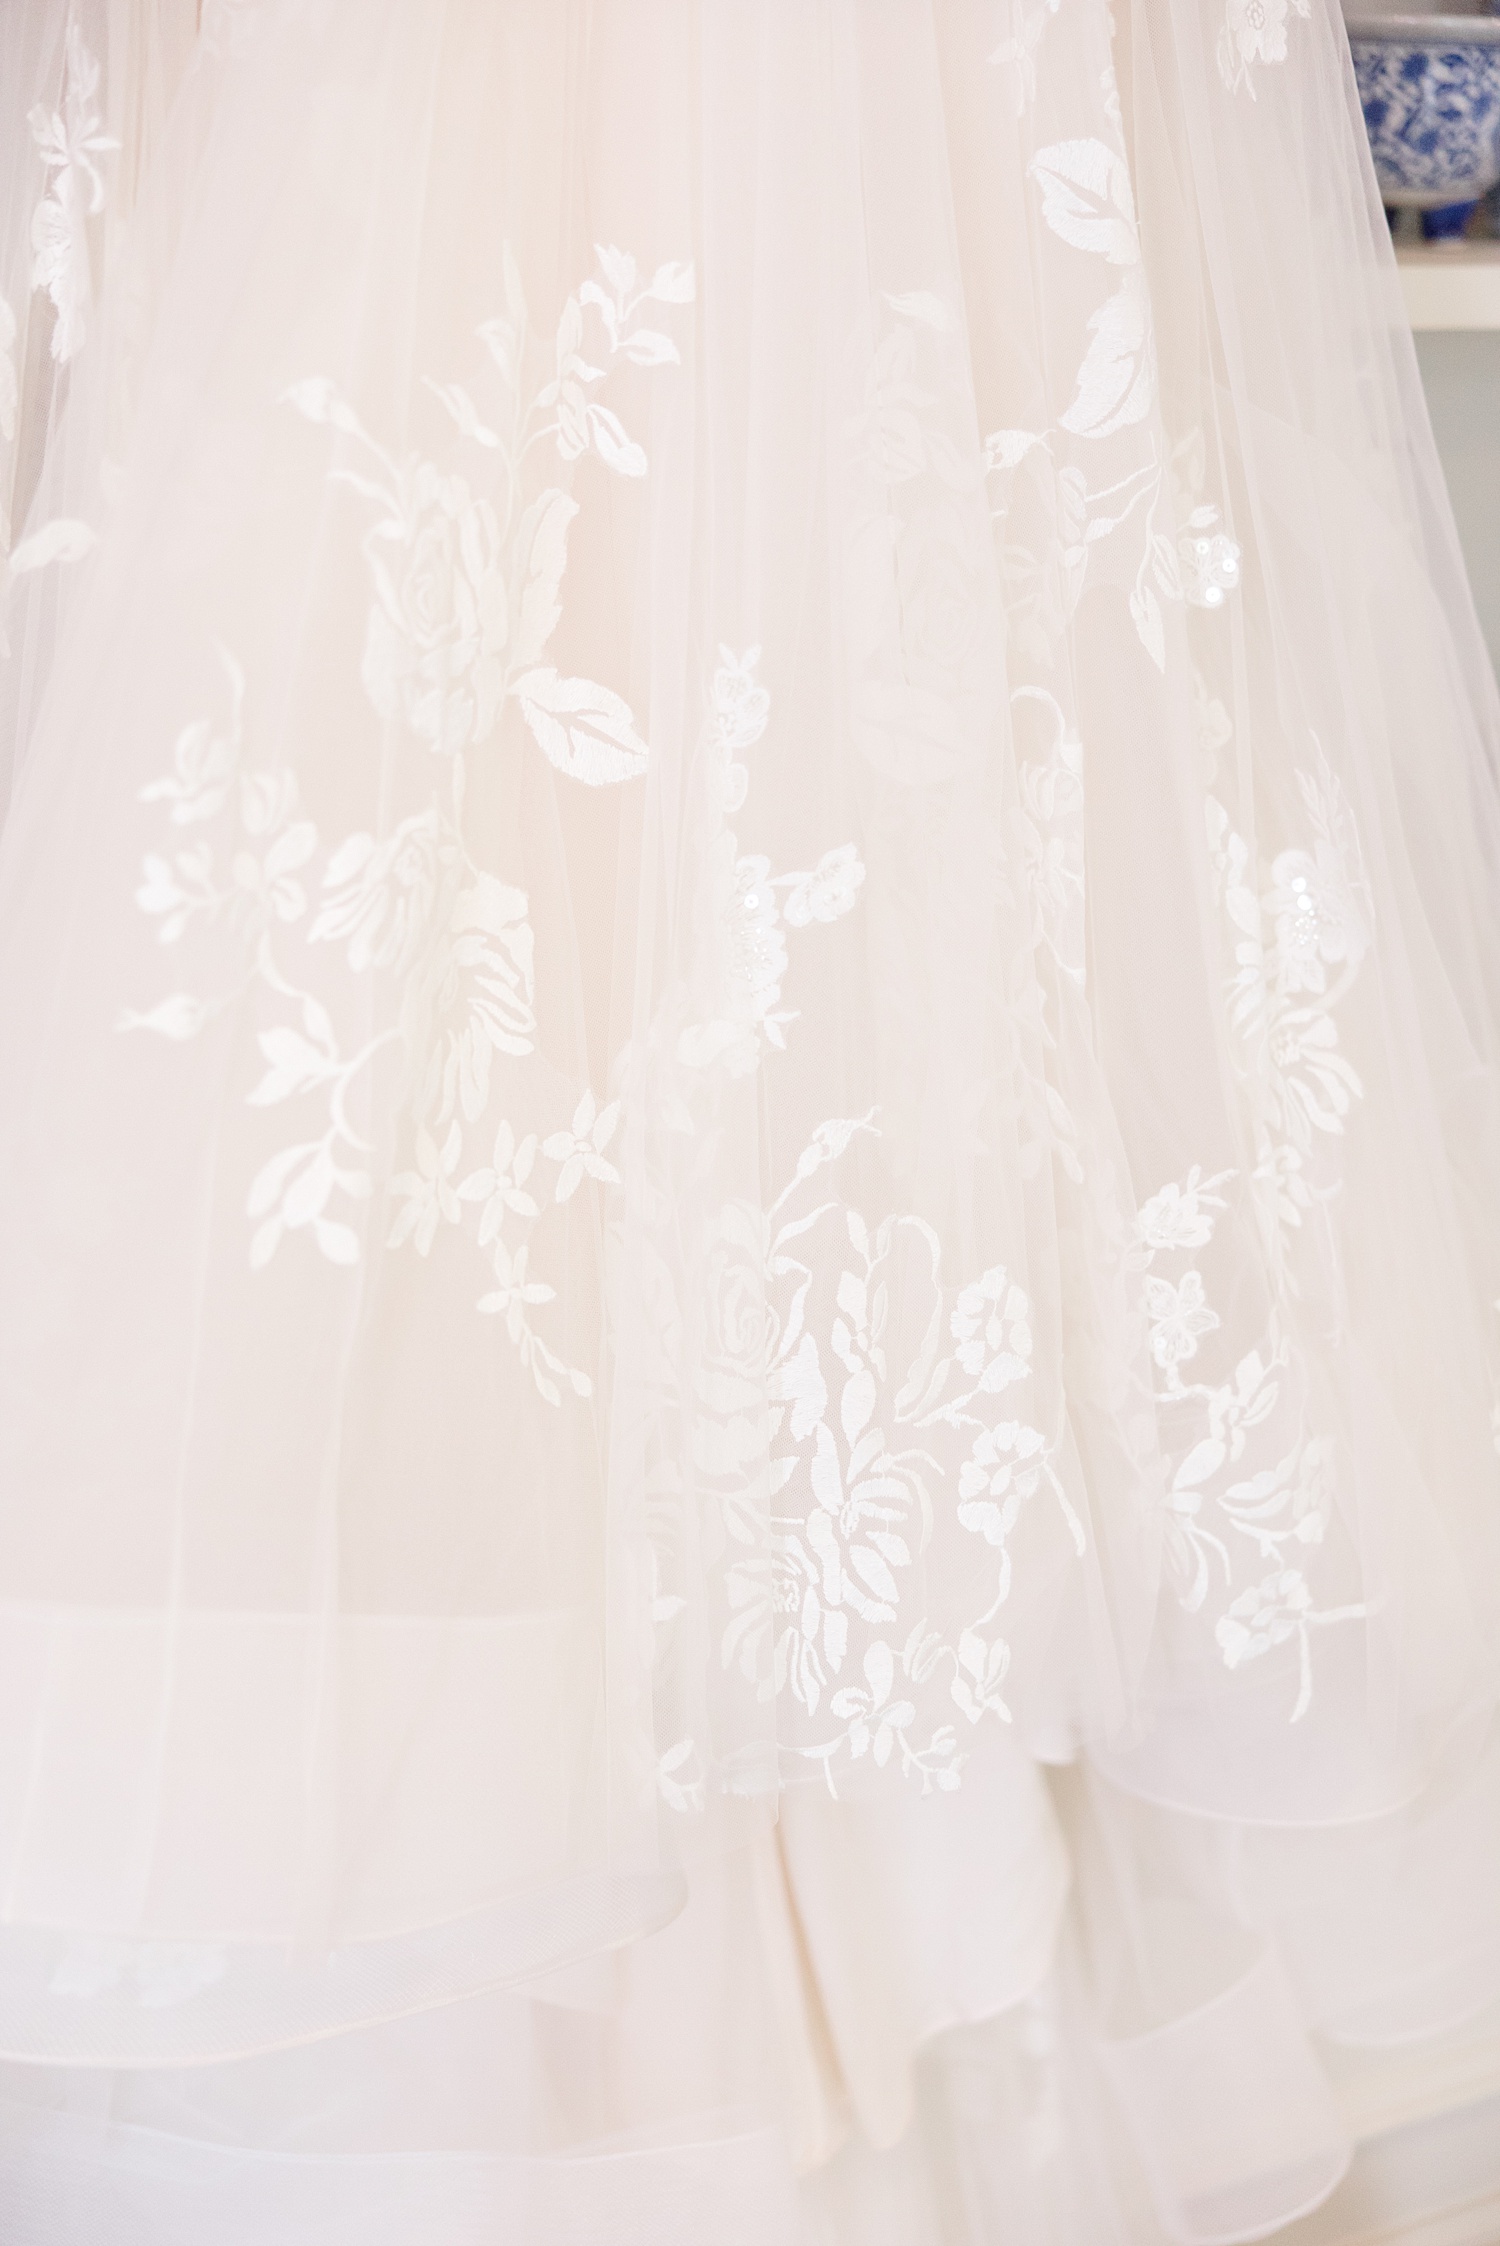 intricate floral lace detail from bride's wedding dress